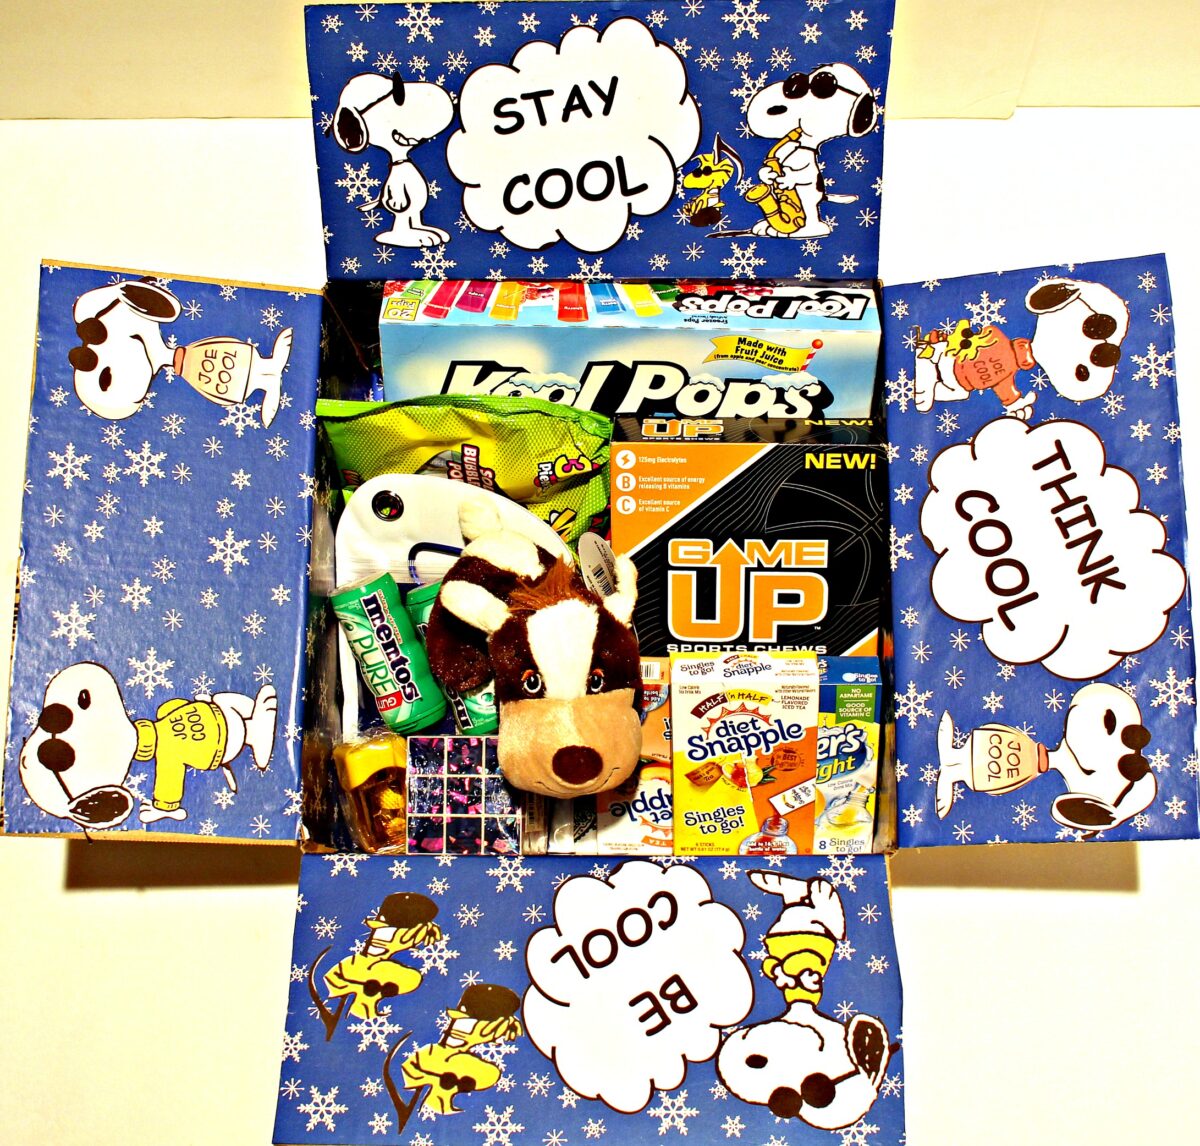 Stay Cool themed Military Care Package with flaps decorated in blue snowflake wrapping paper with Joe Cool images.